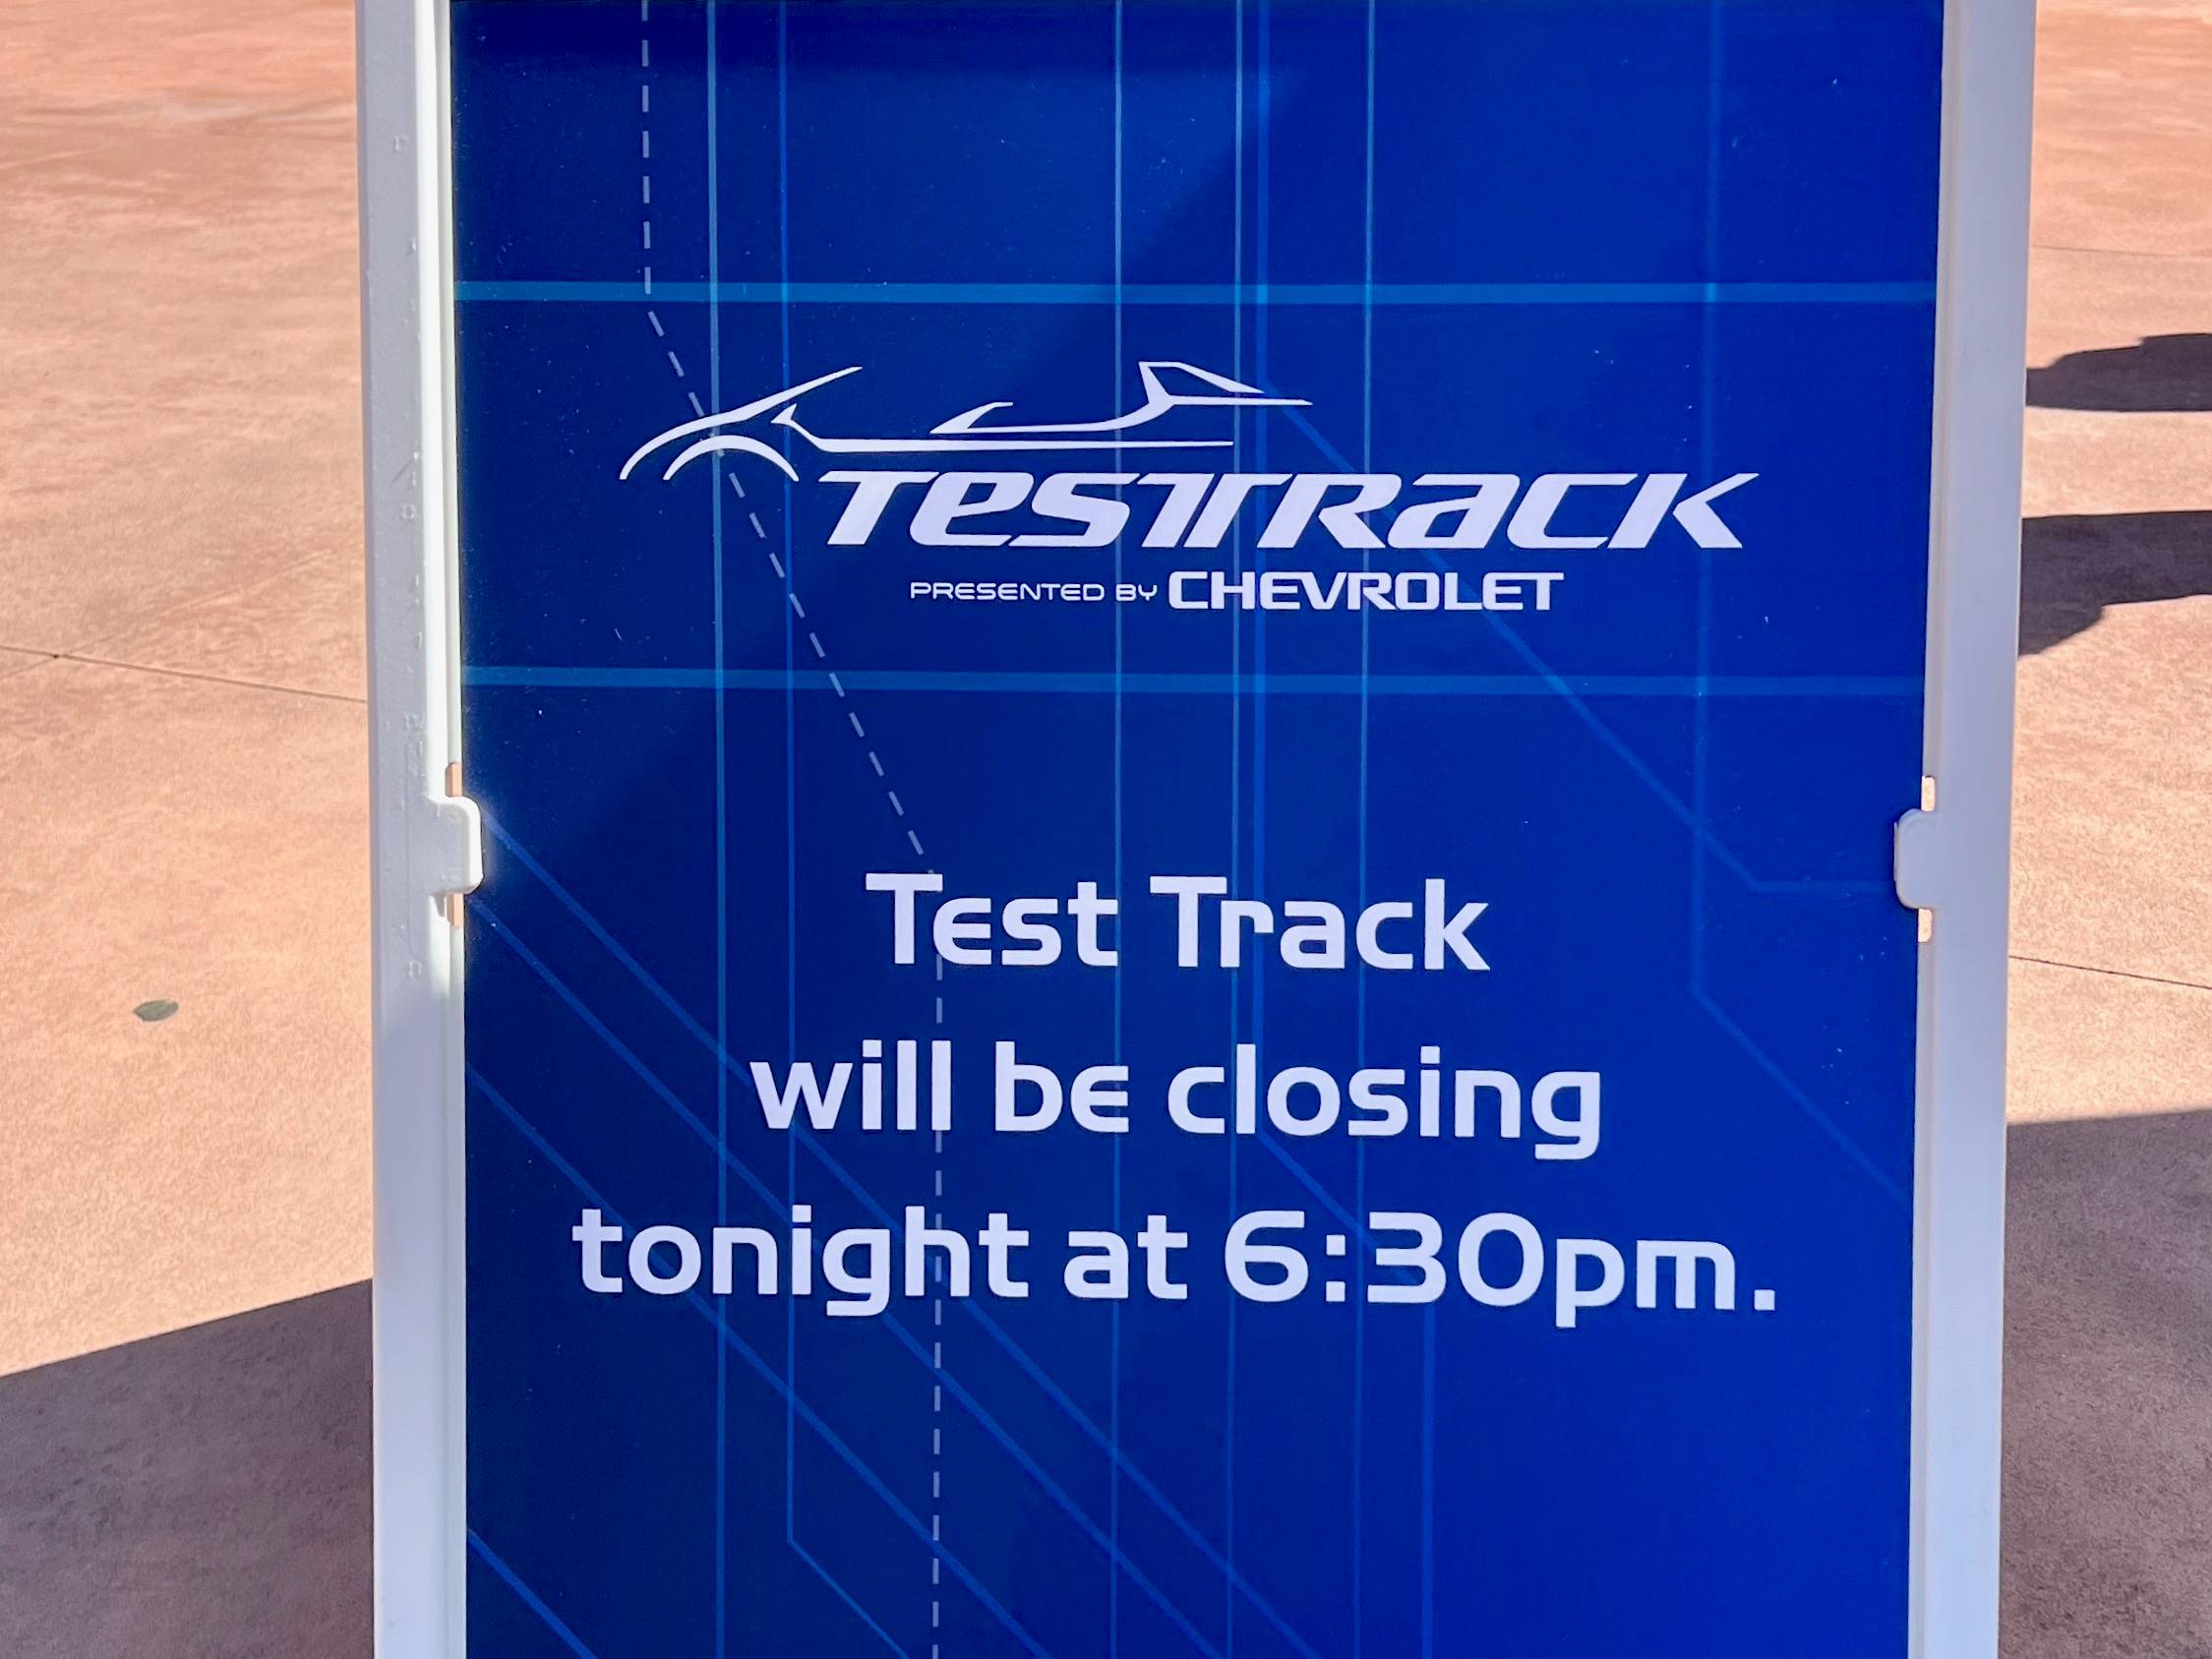 Test Track looks likely to be closed for 3 days again this week